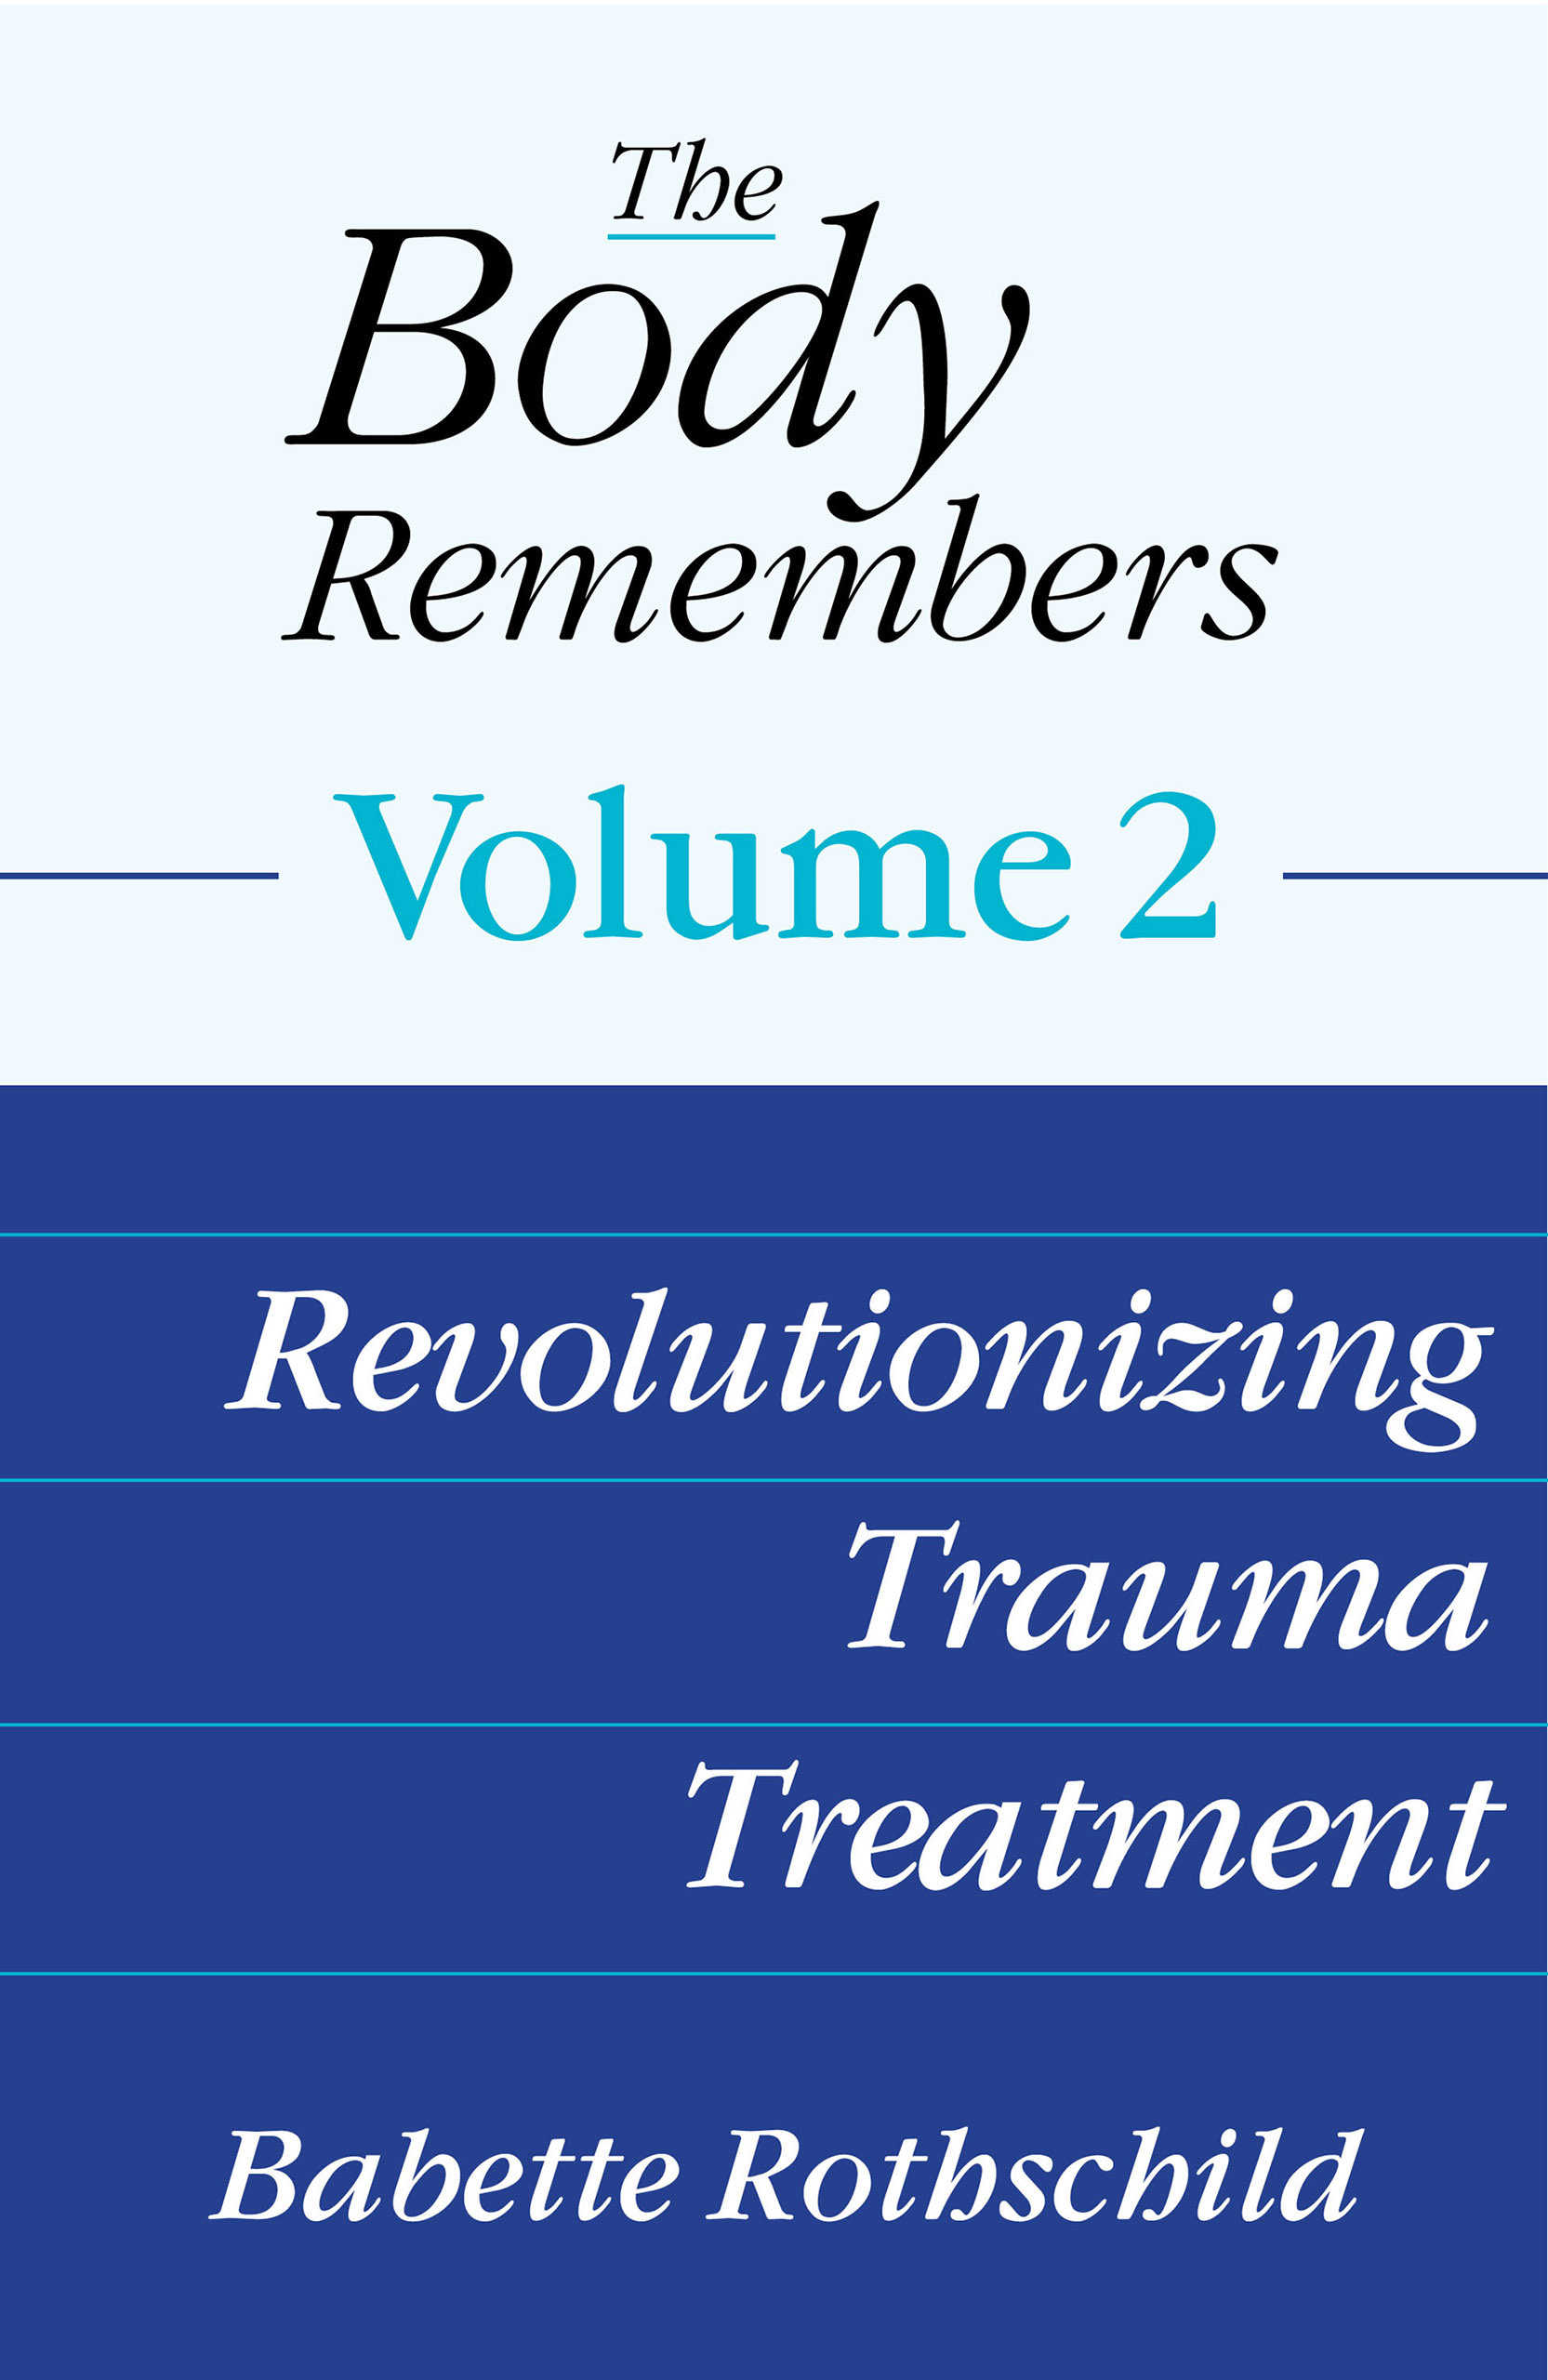 The Body Remembers Volume 2